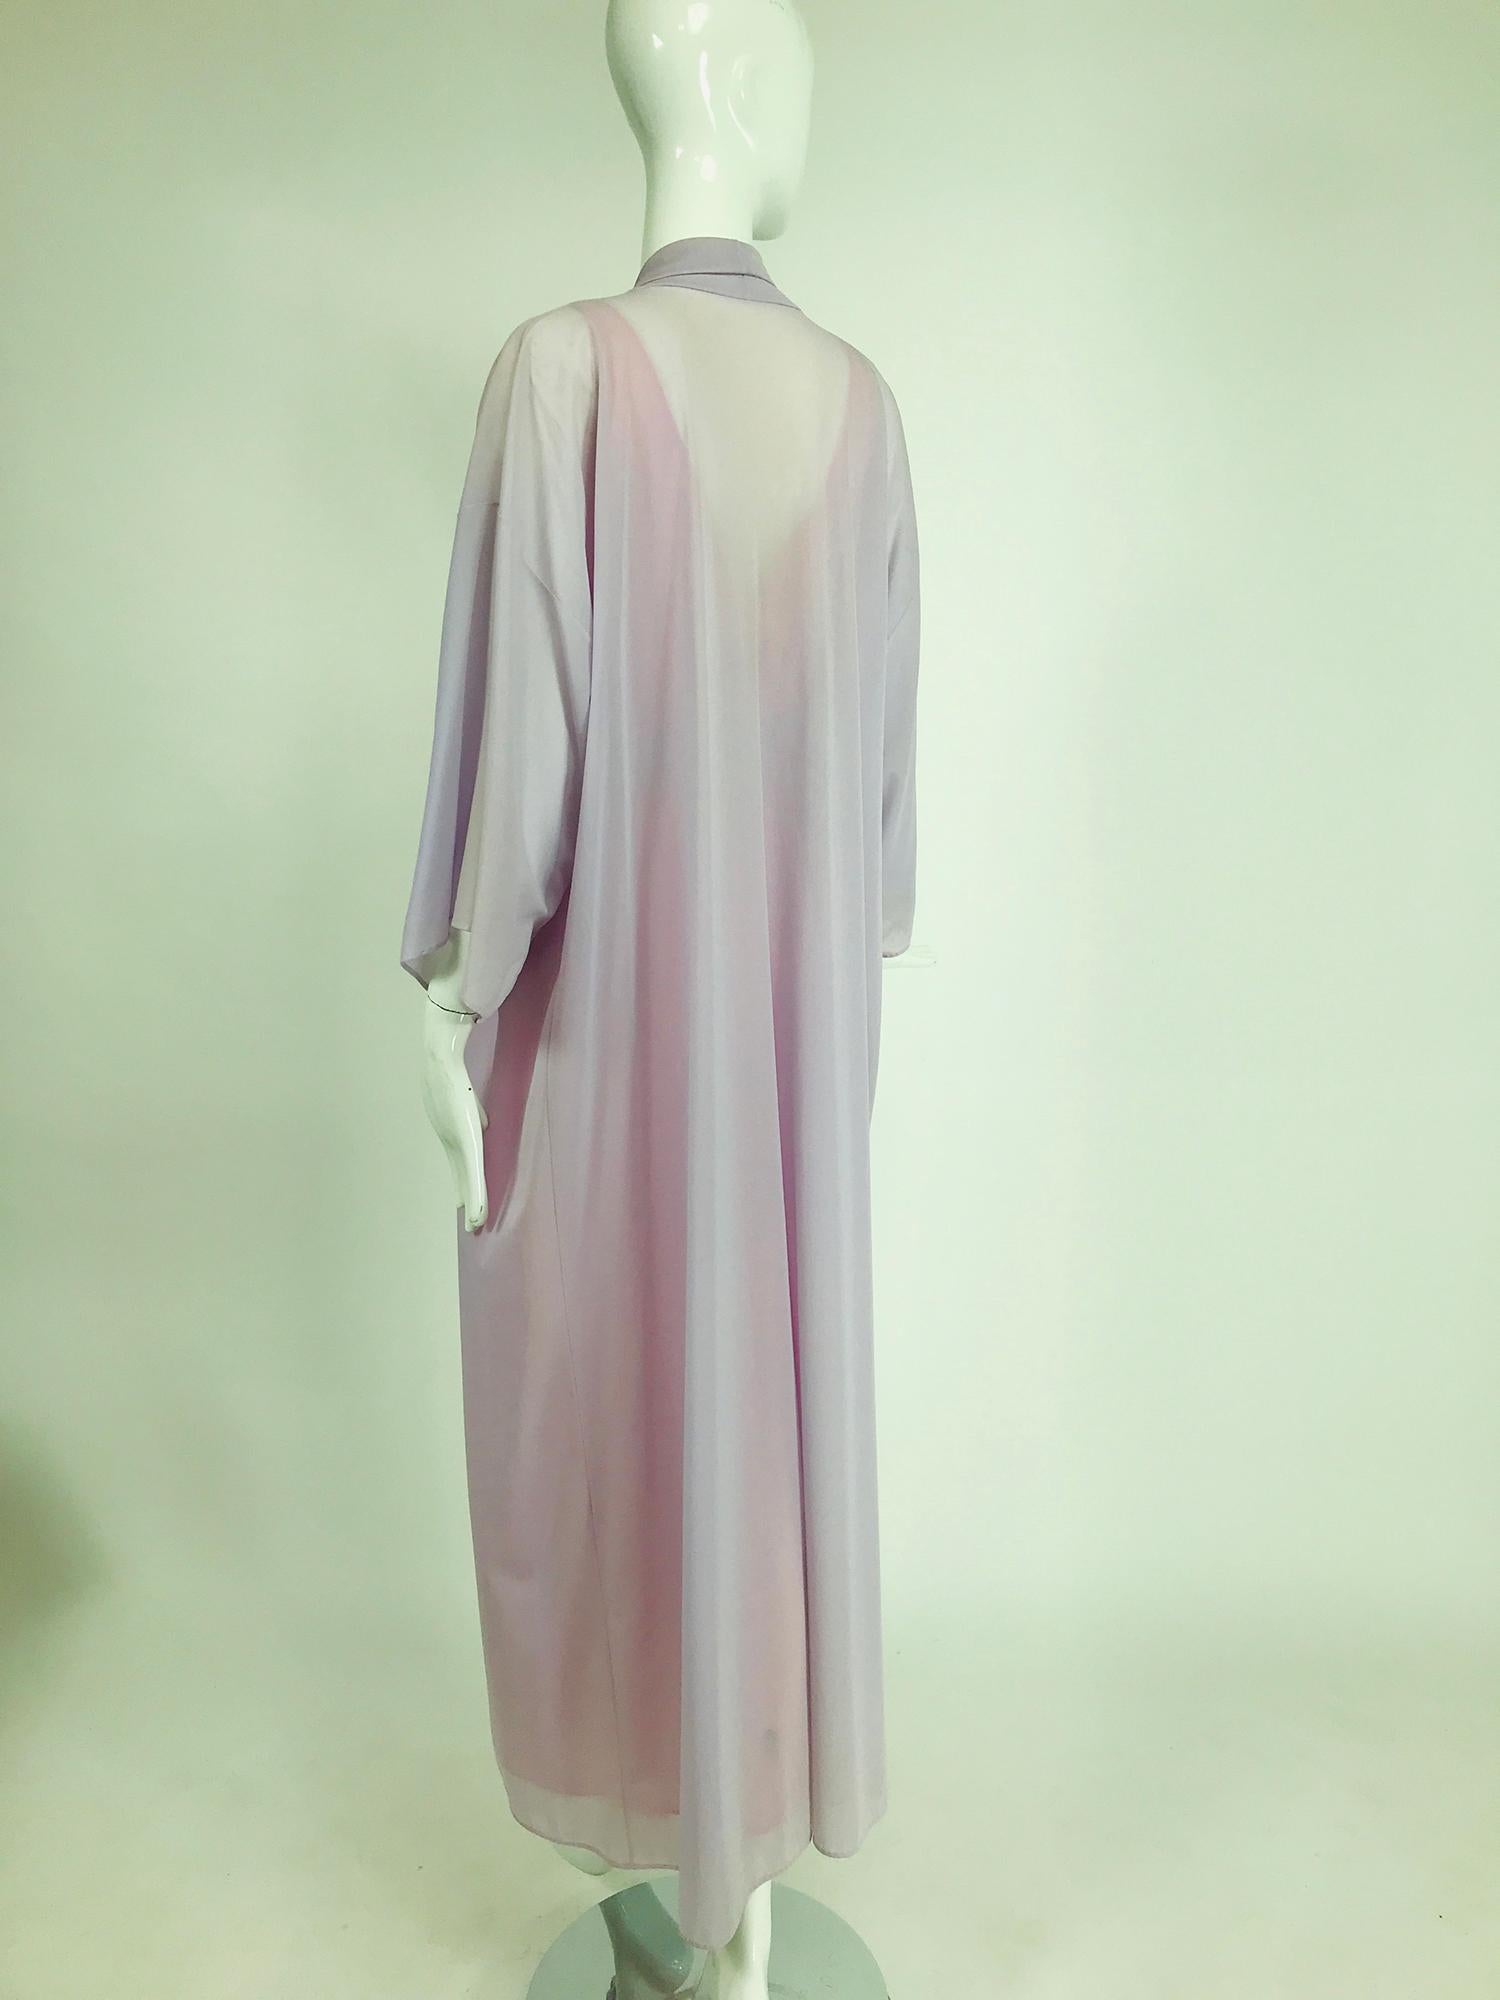 Women's Emilio Pucci for Formfit Rogers 2pc. Sheer Peignoir Robe & Gown 1970s